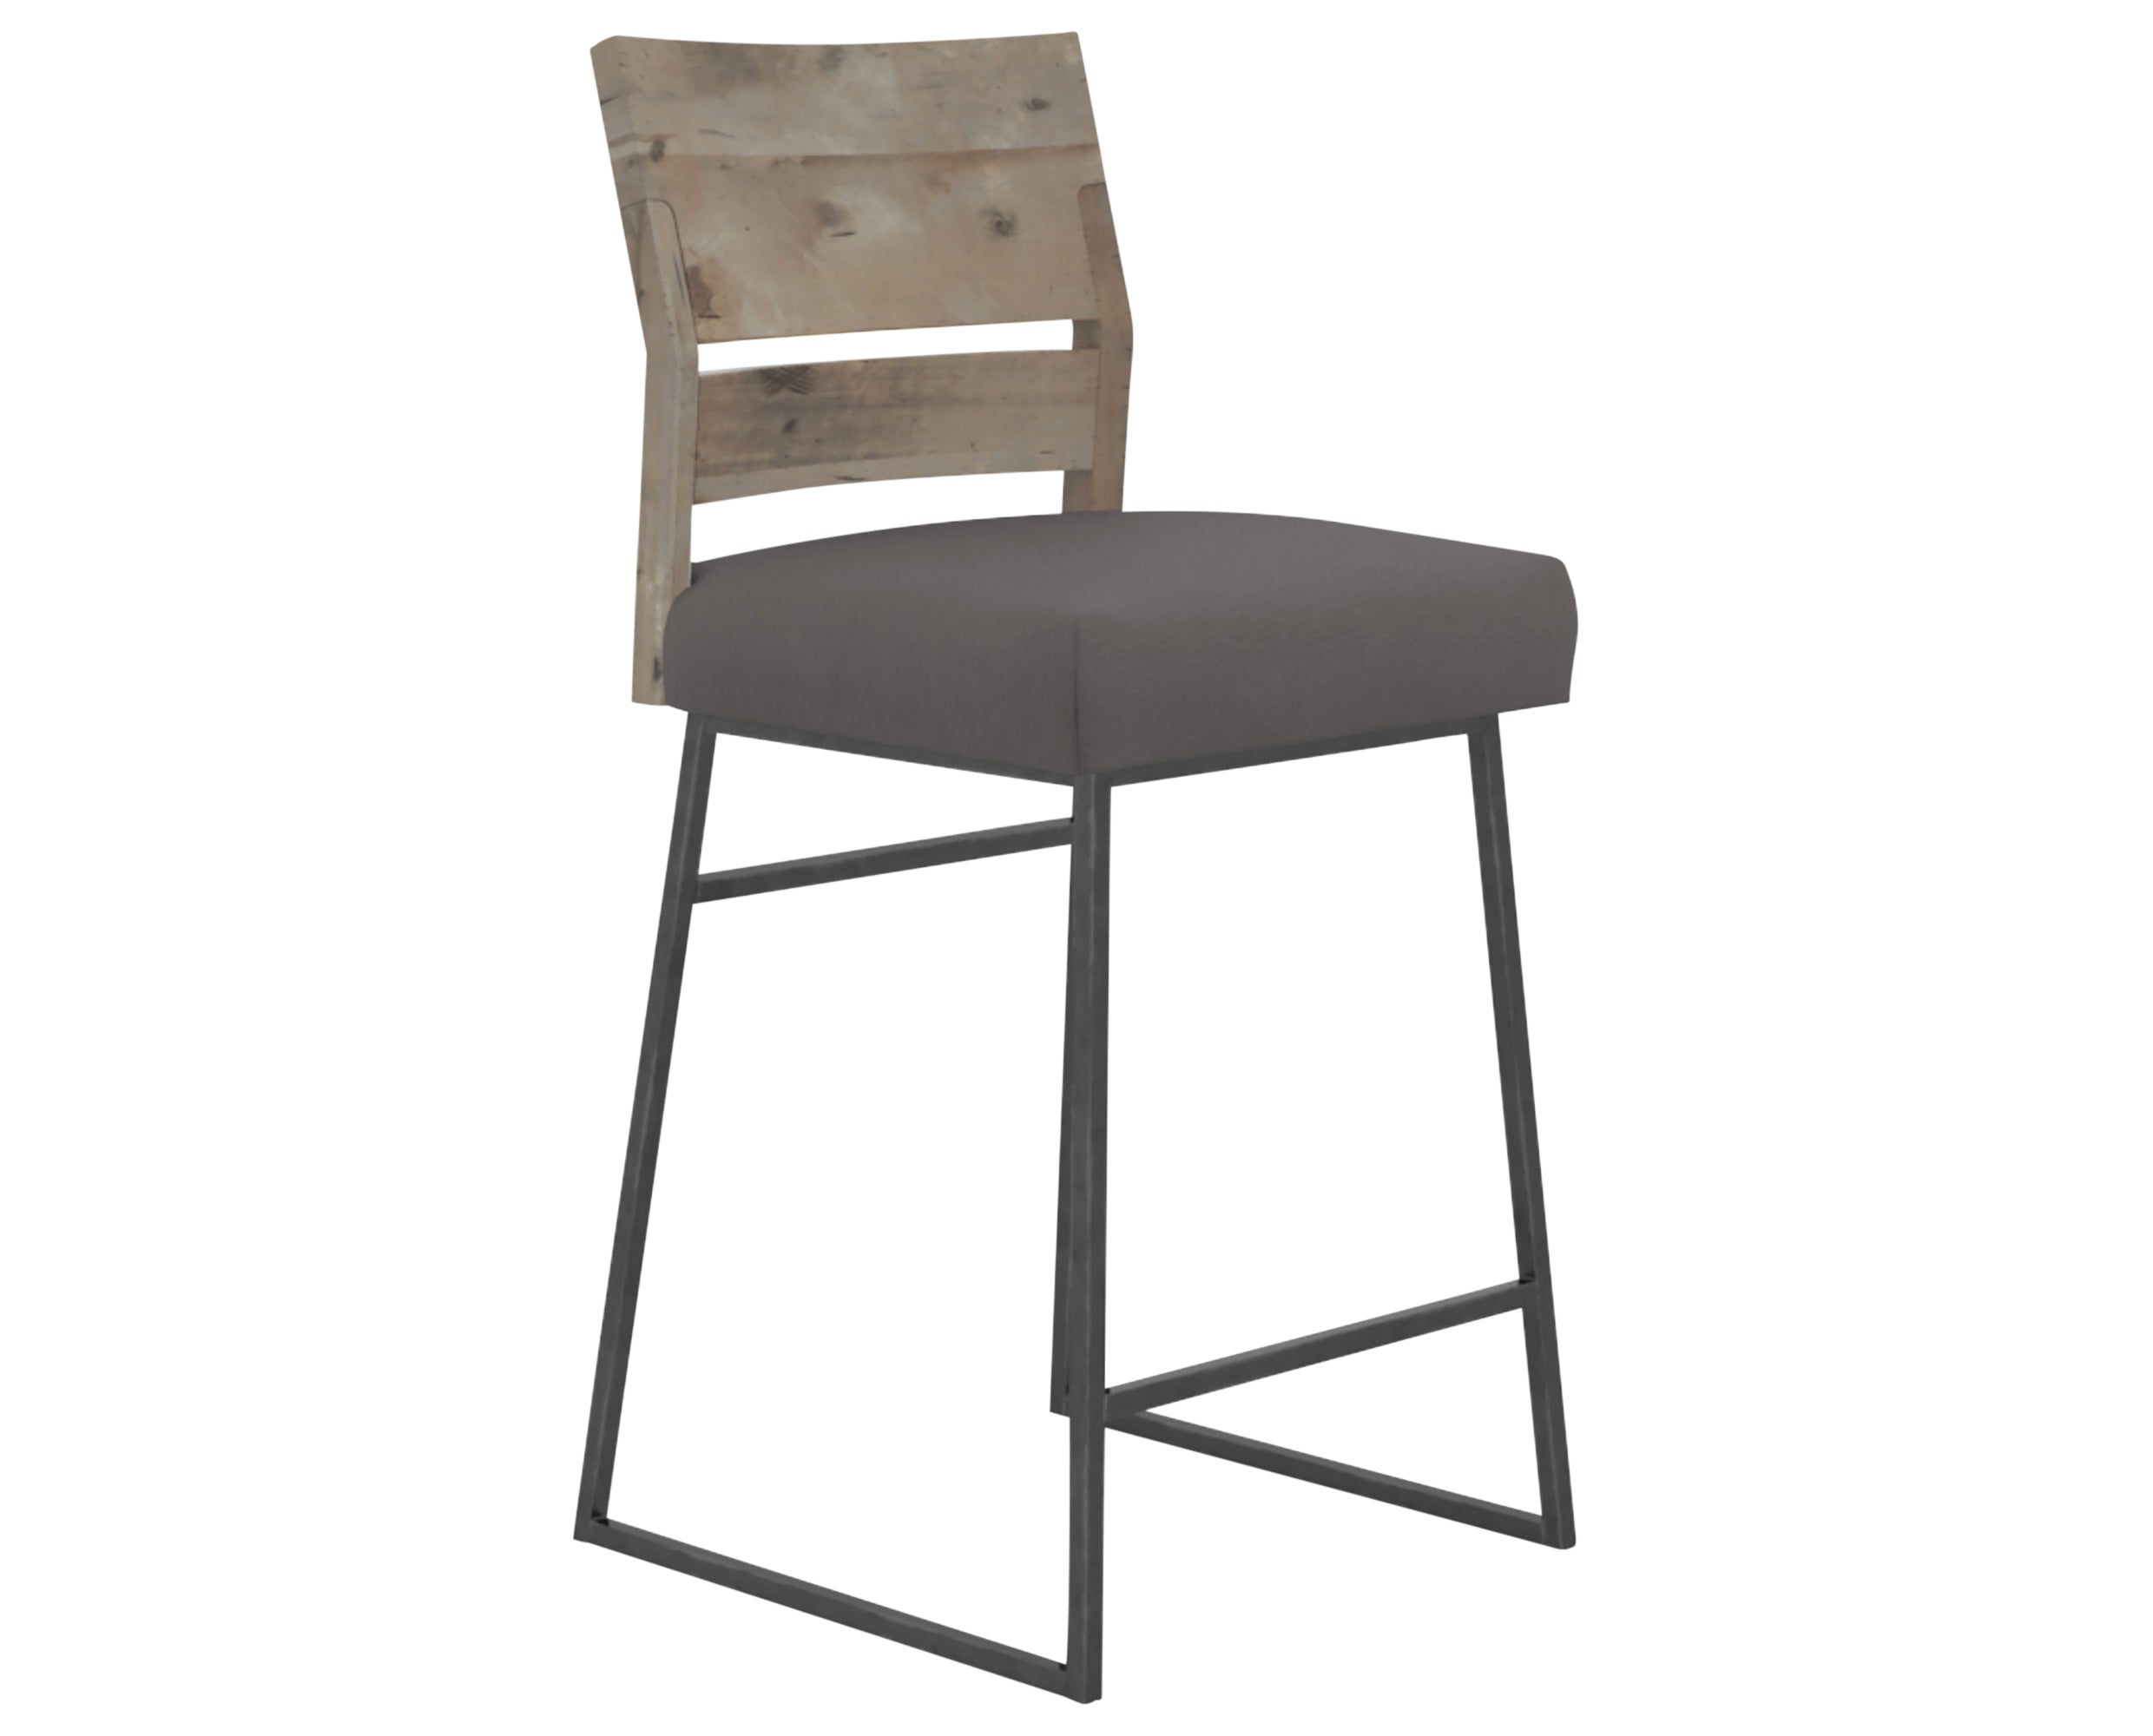 Shadow &amp; Faux Leather XU | Canadel Loft Counter Stool 8149 | Valley Ridge Furniture